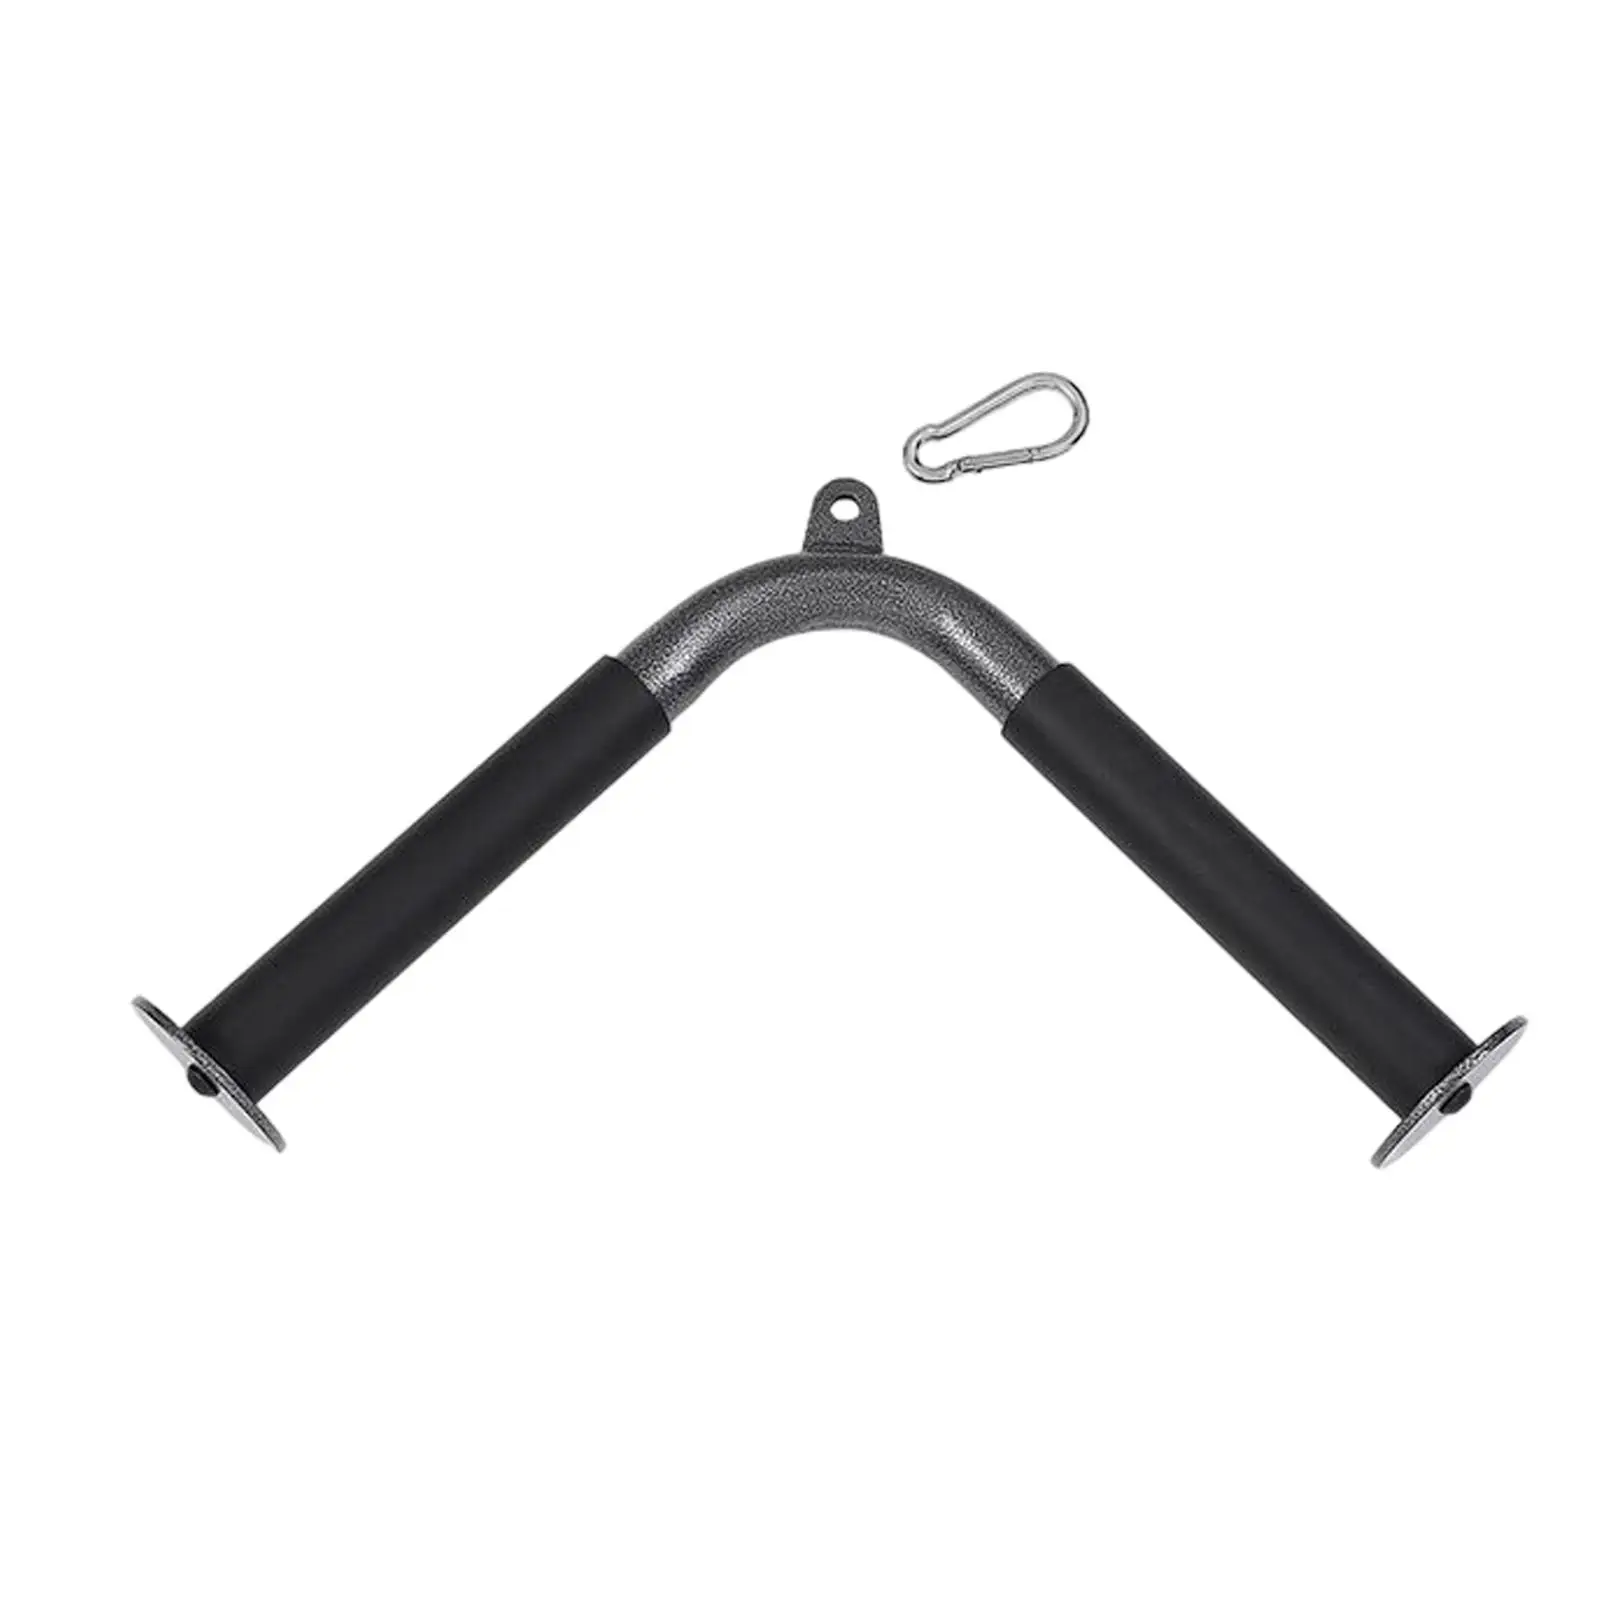 V Shaped Tricep Press Down Bar Cable Machine Handle Attachment Double Handle for Weight Lifting Fitness Exercise Home